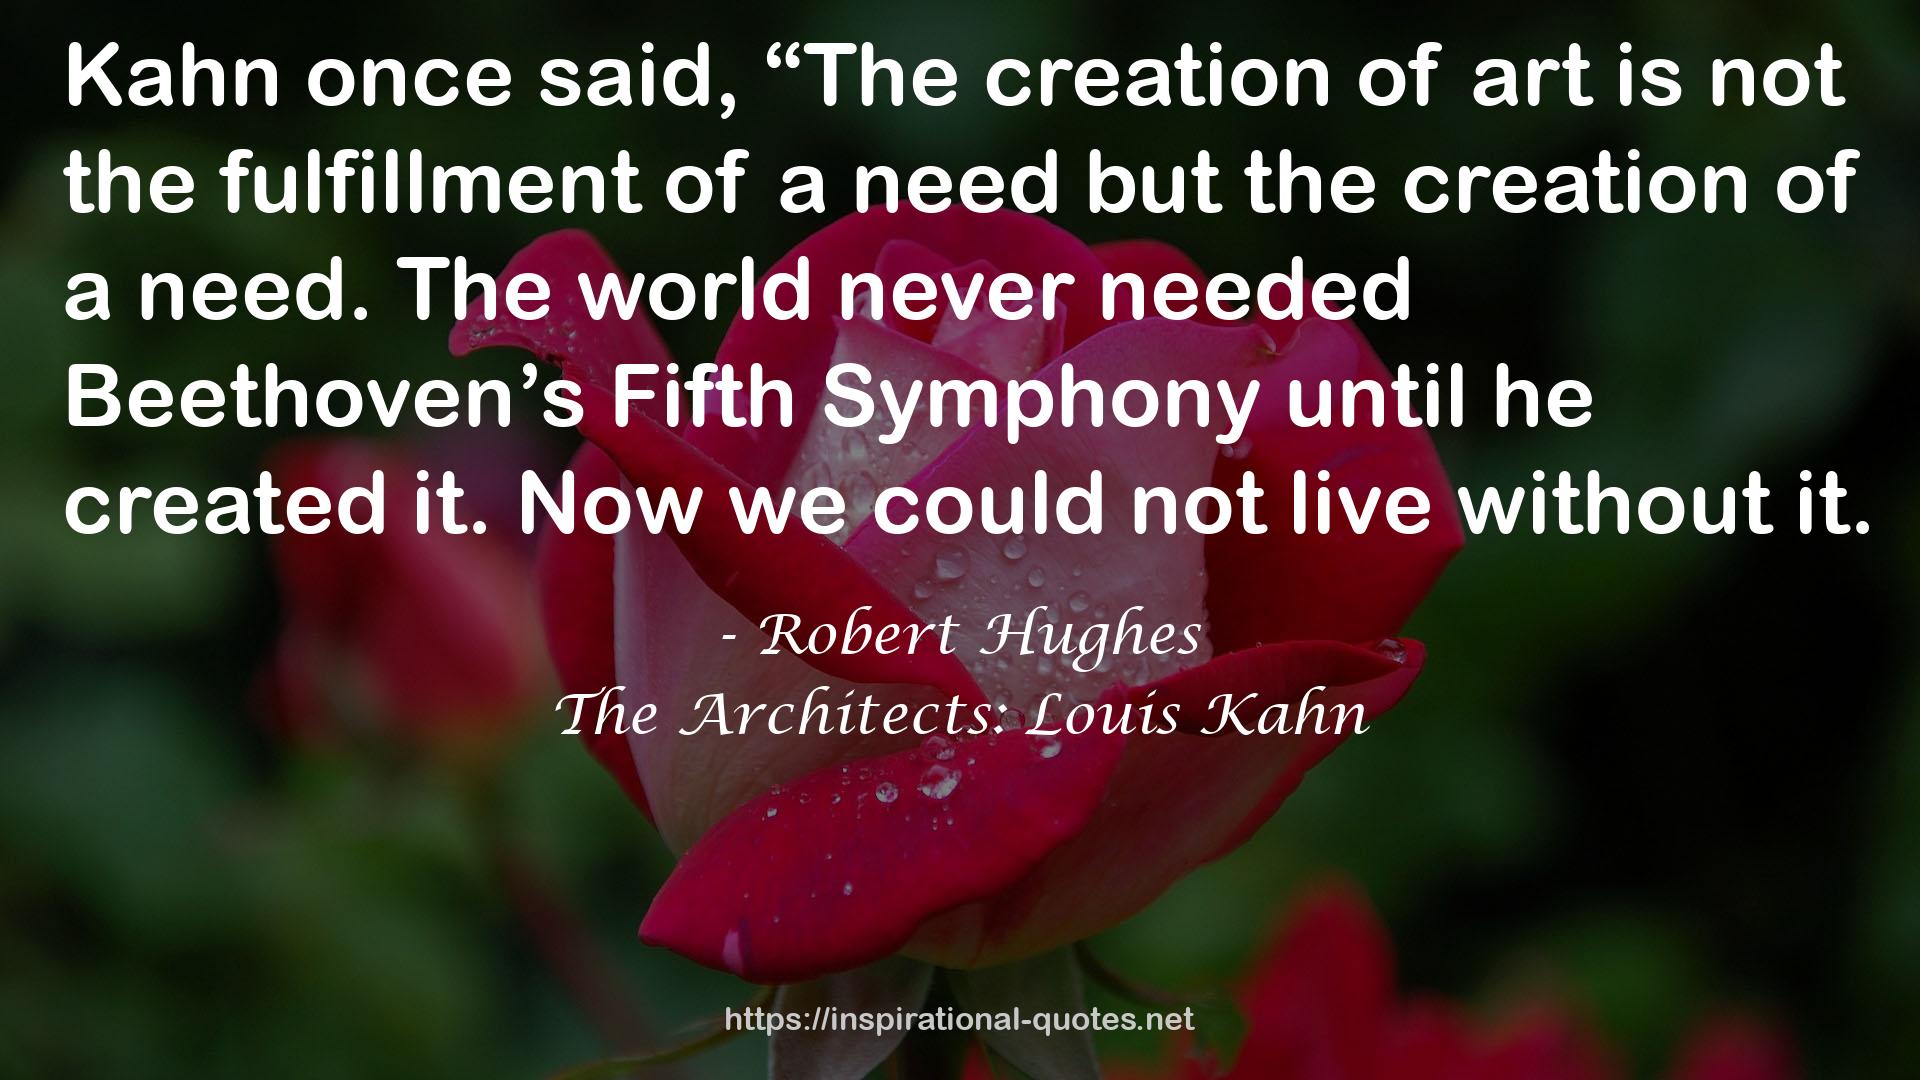 The Architects: Louis Kahn QUOTES